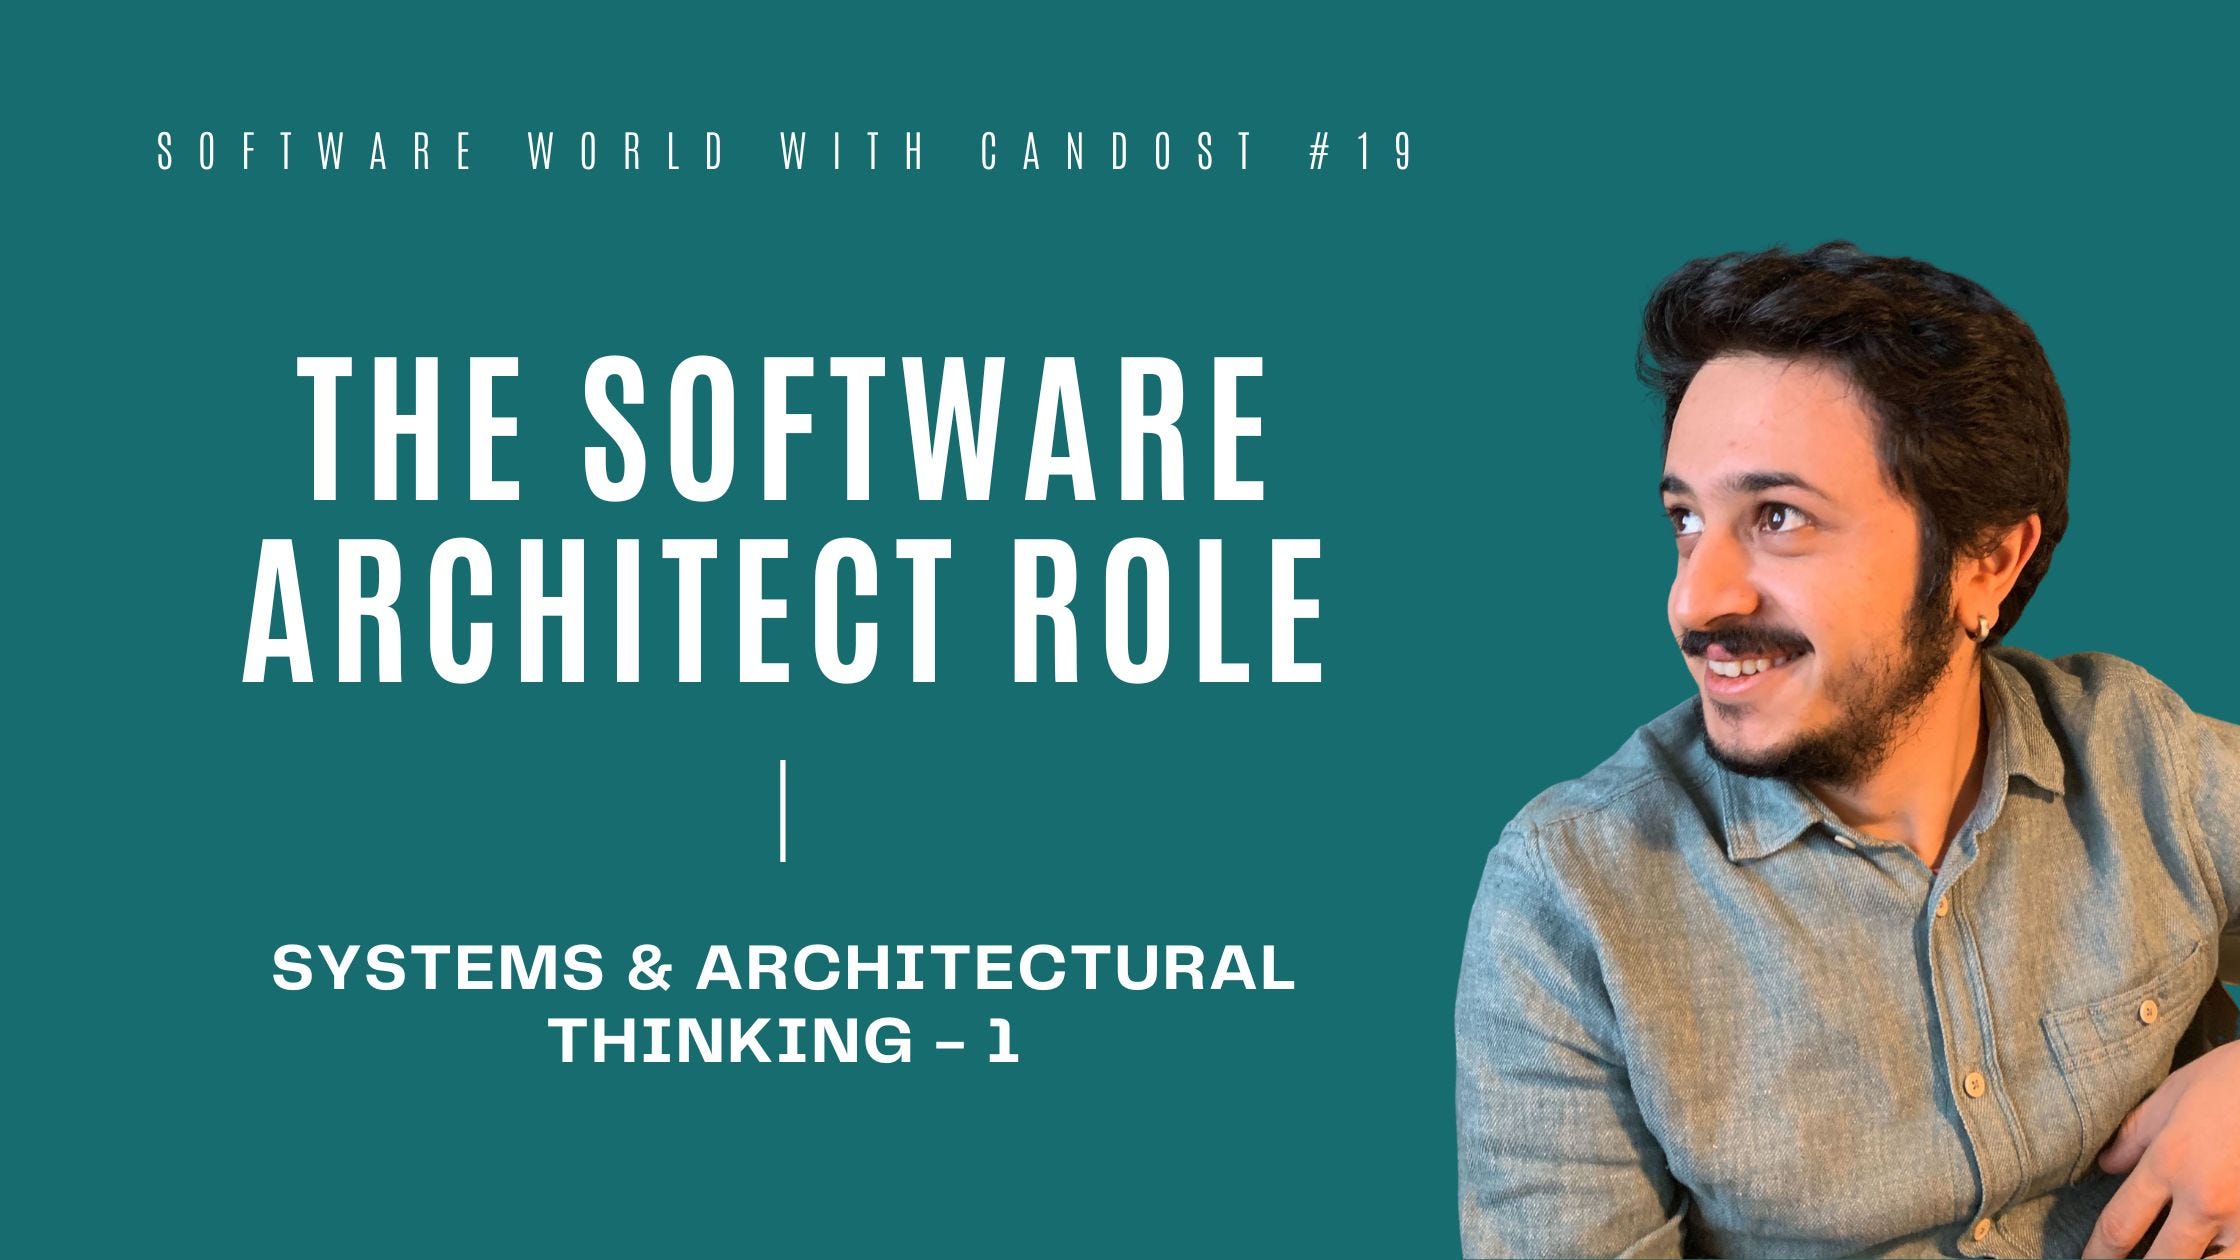 #19: The Software Architect Role